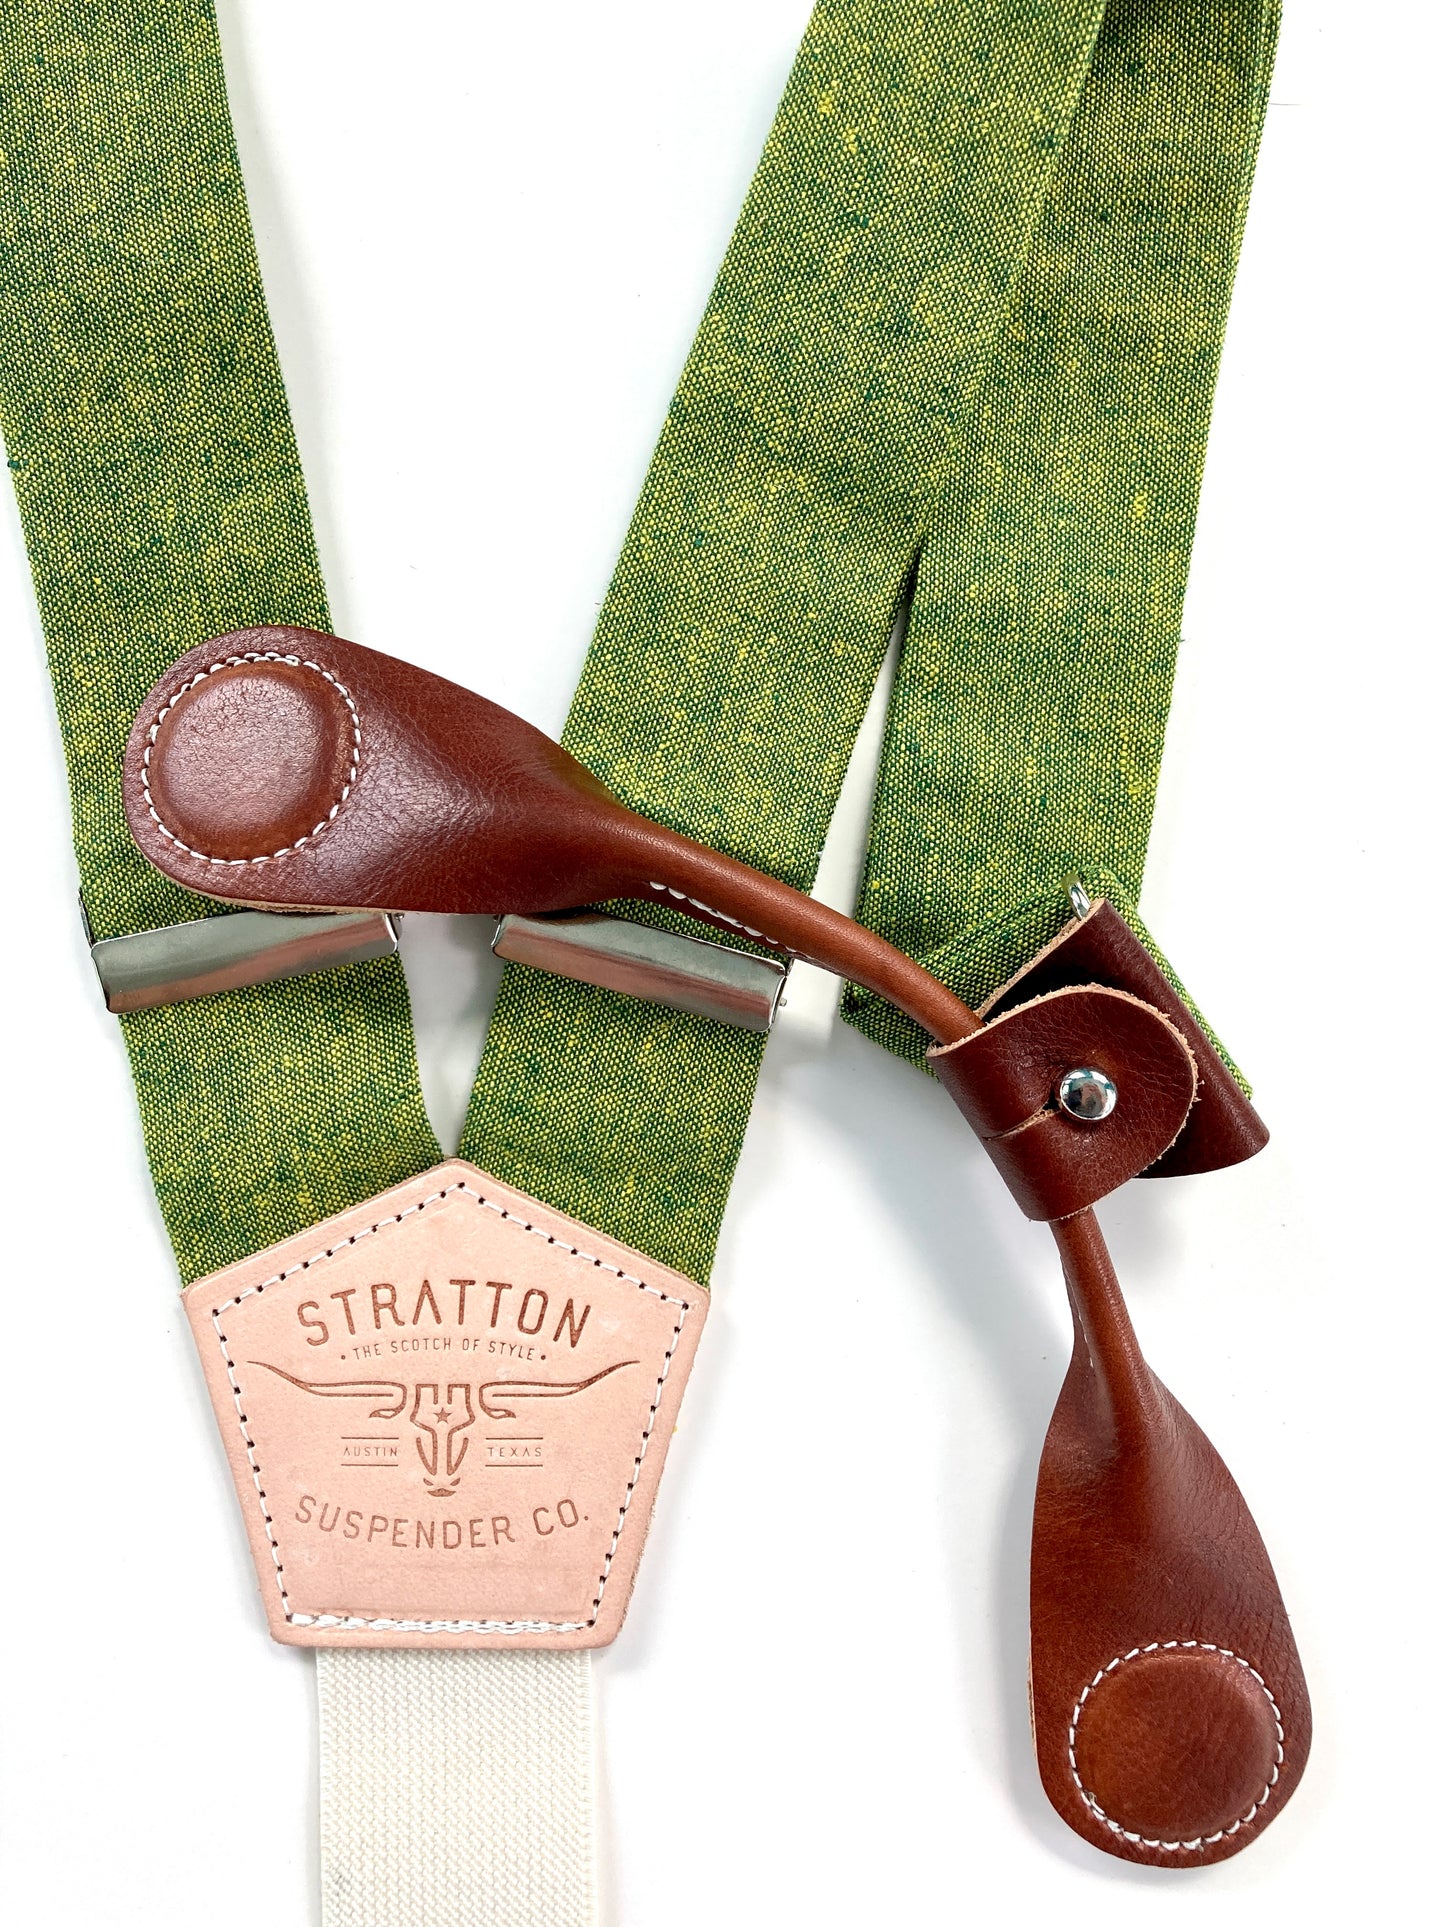 Stratton Suspender Co. features the Palm green with yellow woven threaded linen suspenders on veg tan shoulder leather with cream colored elastic back strap for the Fall 2022 suspenders collection Magnetic Stratton Suspender clasps in Cognac Pontedero Italian leather hand-picked by Stratton Suspender Co.